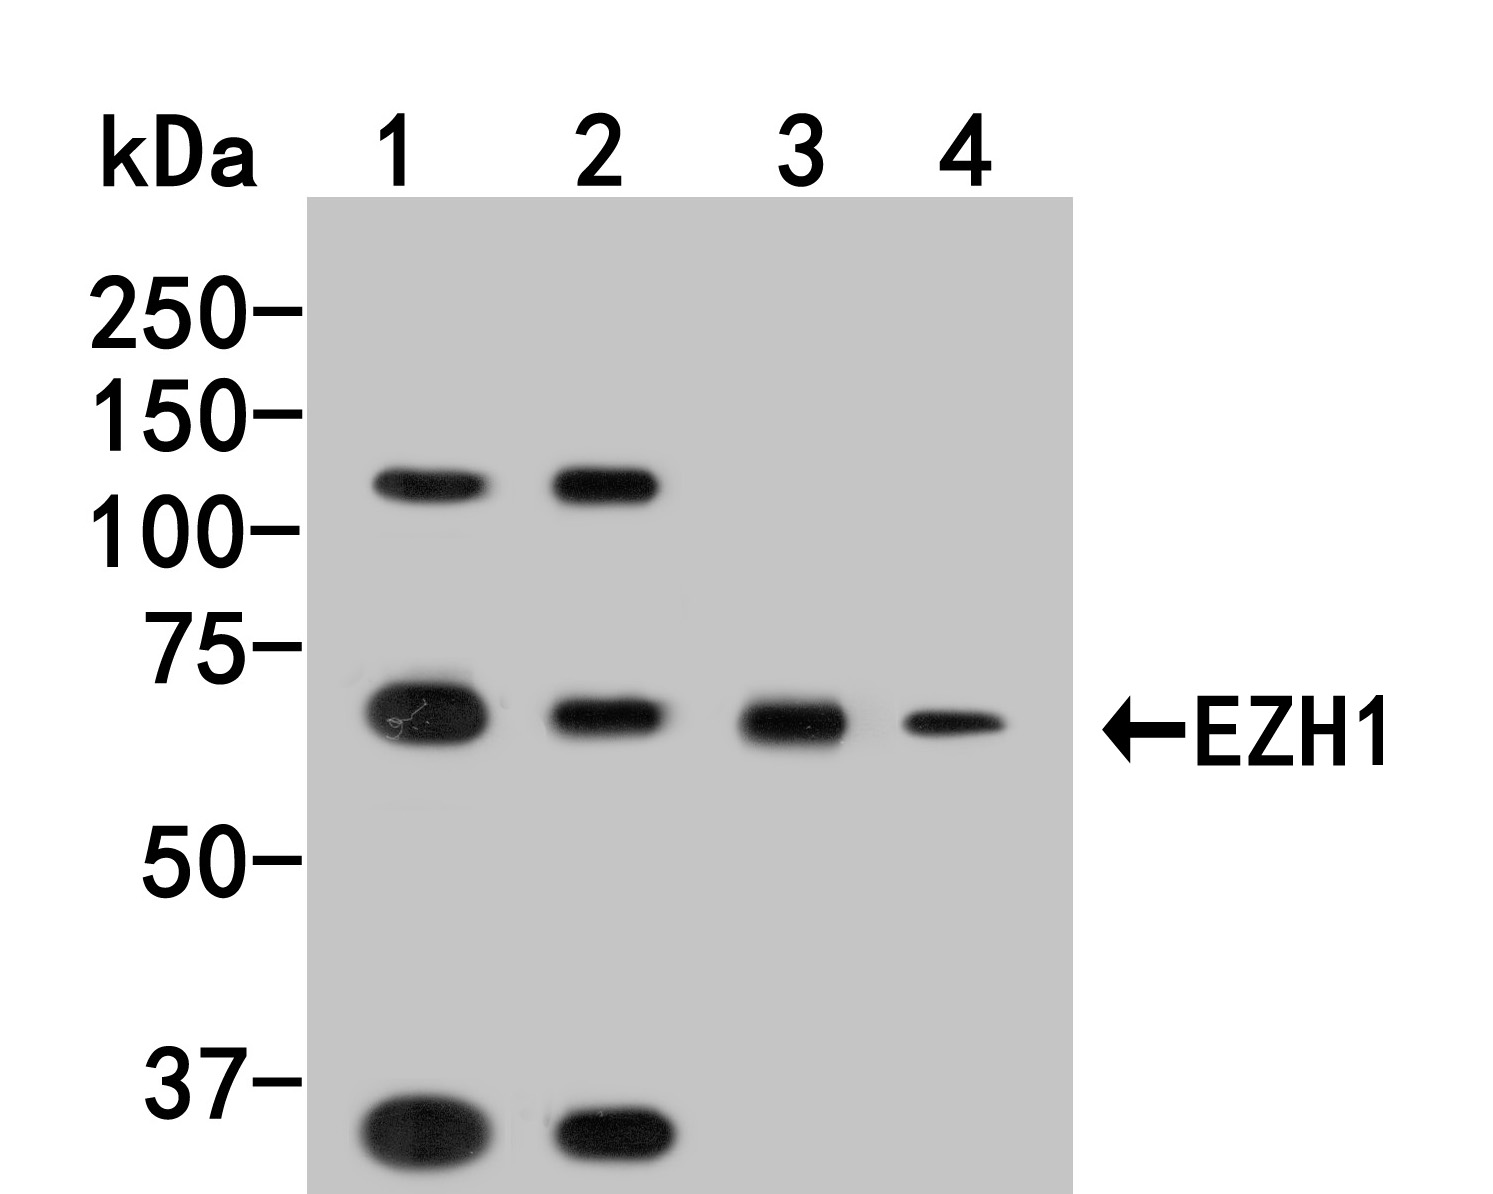 Western blot analysis of EZH1 on different lysates. Proteins were transferred to a PVDF membrane and blocked with 5% BSA in PBS for 1 hour at room temperature. The primary antibody (HA500184, 1/1,000) was used in 5% BSA at room temperature for 2 hours. Goat Anti-Rabbit IgG - HRP Secondary Antibody (HA1001) at 1:200,000 dilution was used for 1 hour at room temperature.<br />
Positive control: <br />
Lane 1: Siha cell lysate<br />
Lane 2: Hela cell lysate<br />
Lane 3: Mouse hippocampusl tissue lysate<br />
Lane 4: Rat brain tissue lysate